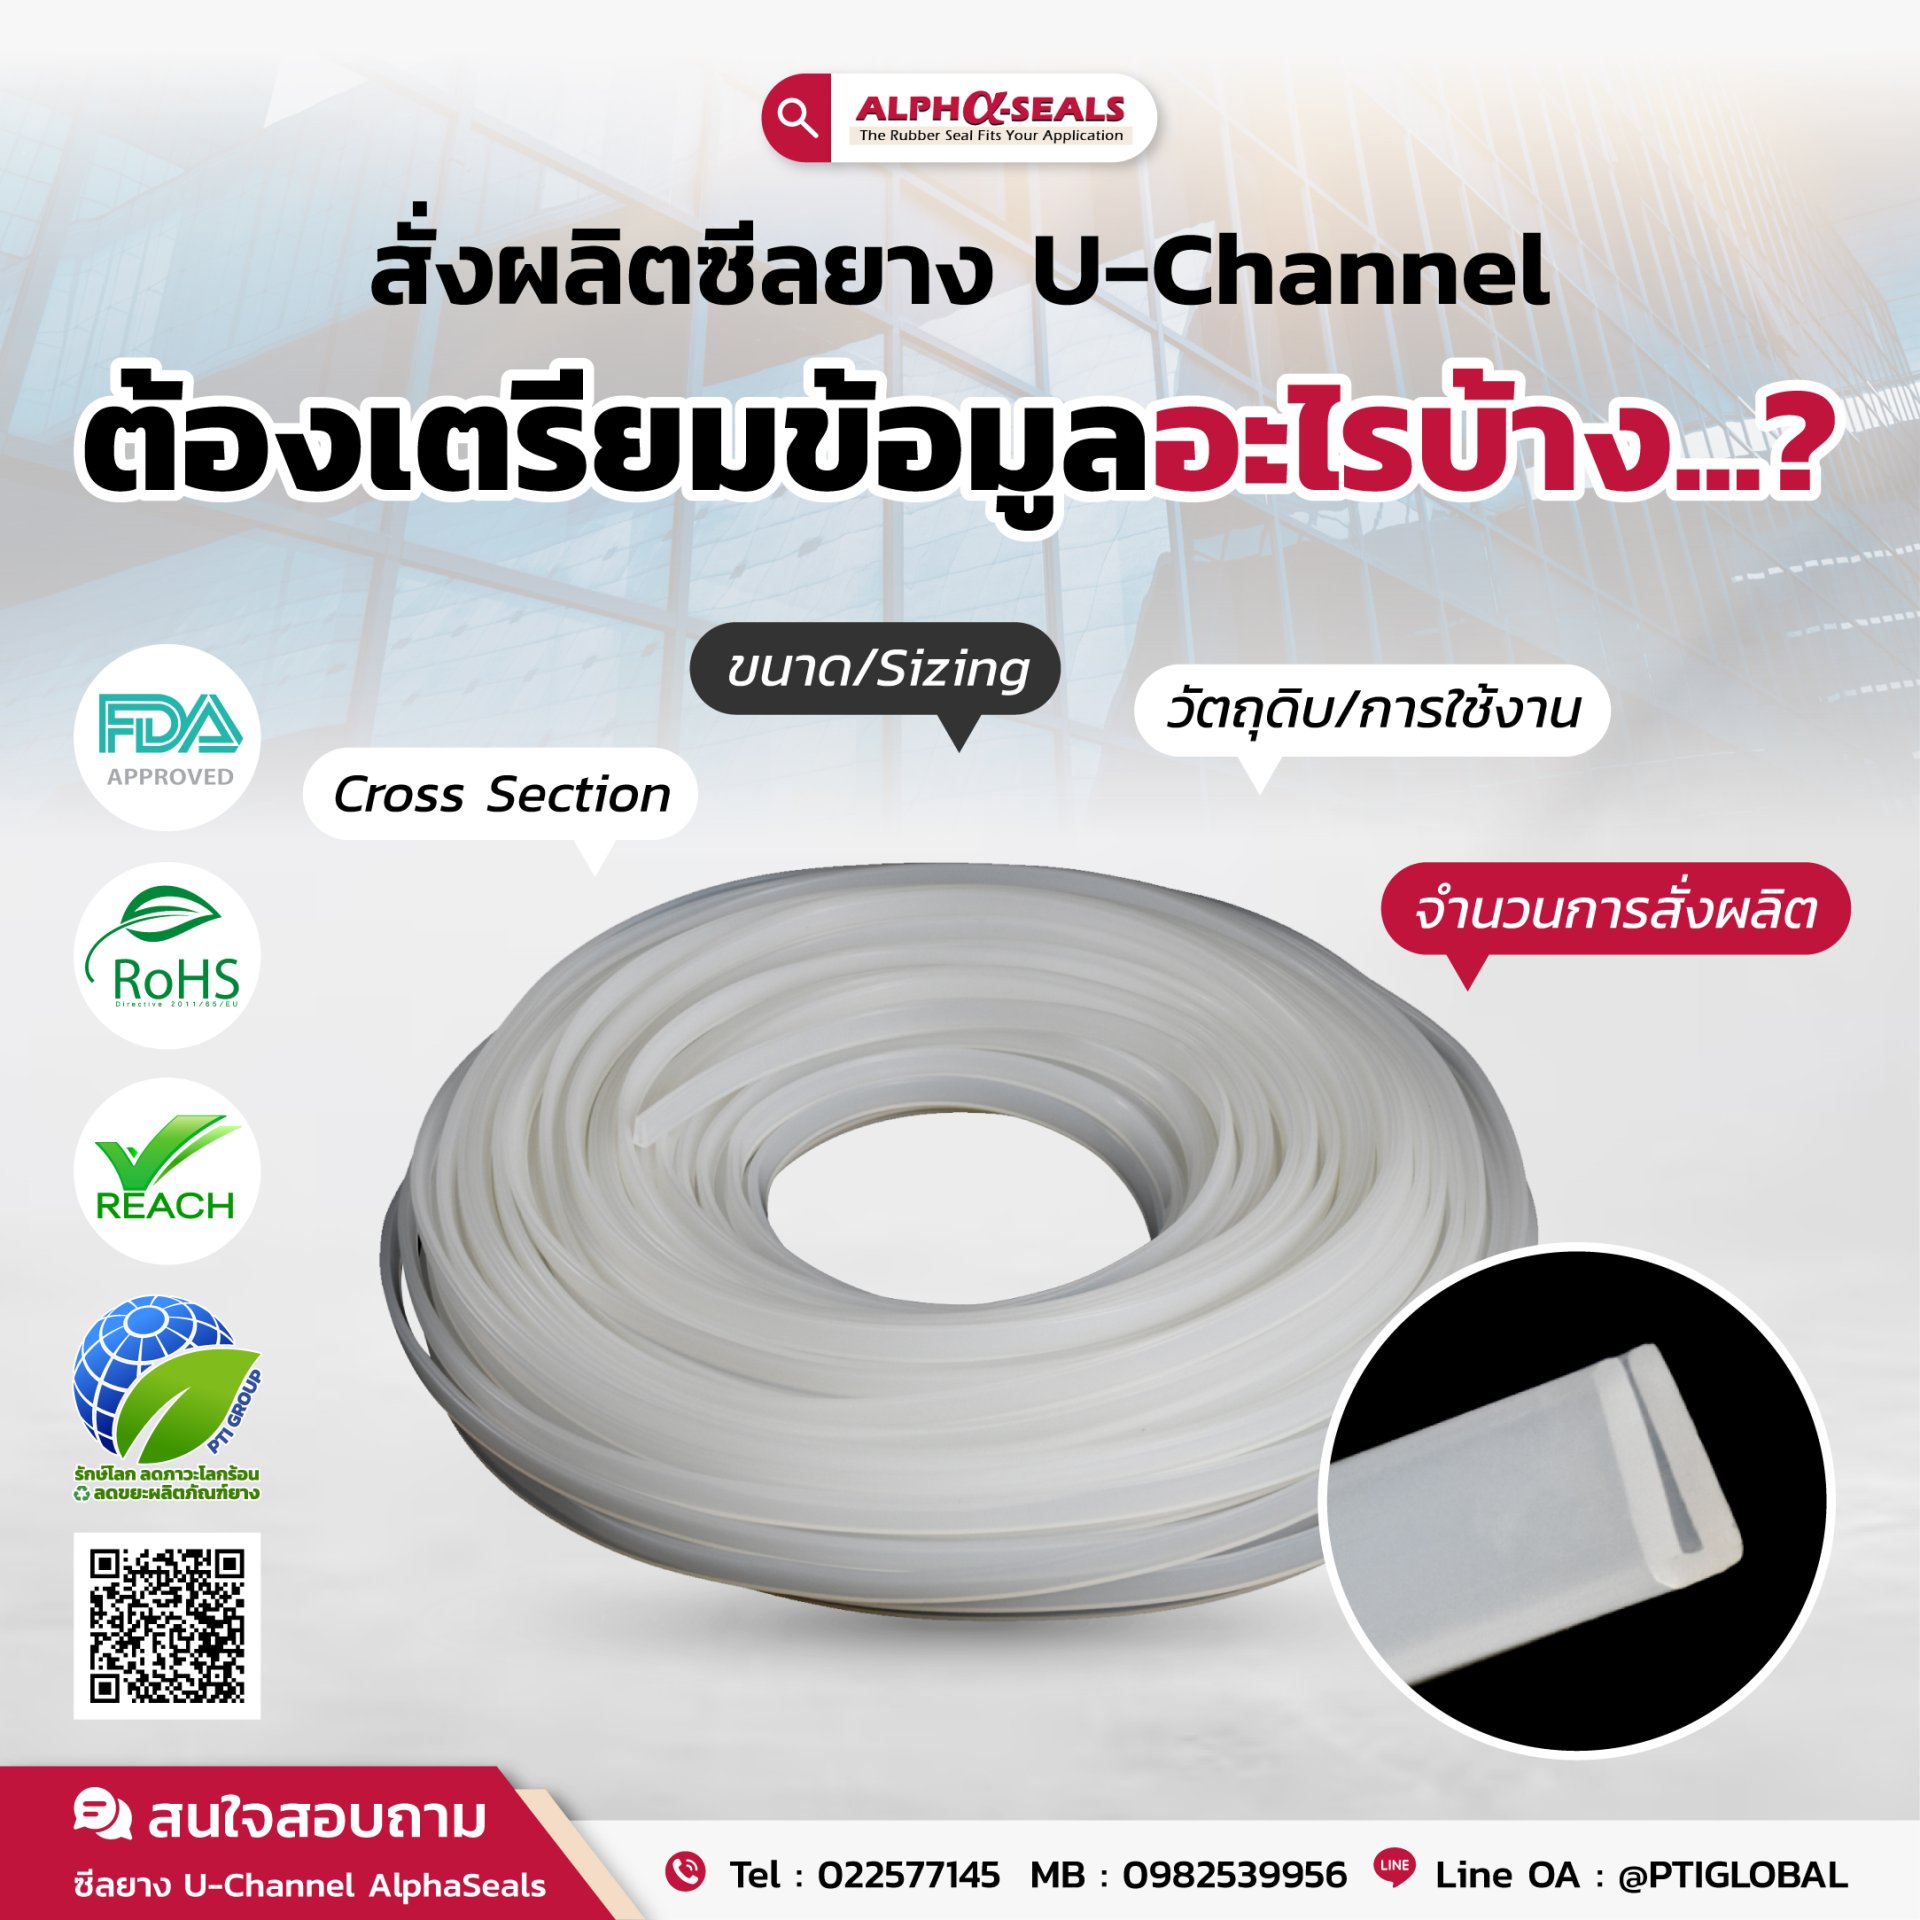 To order the production of U-Channel rubber seals, what information must be prepared?